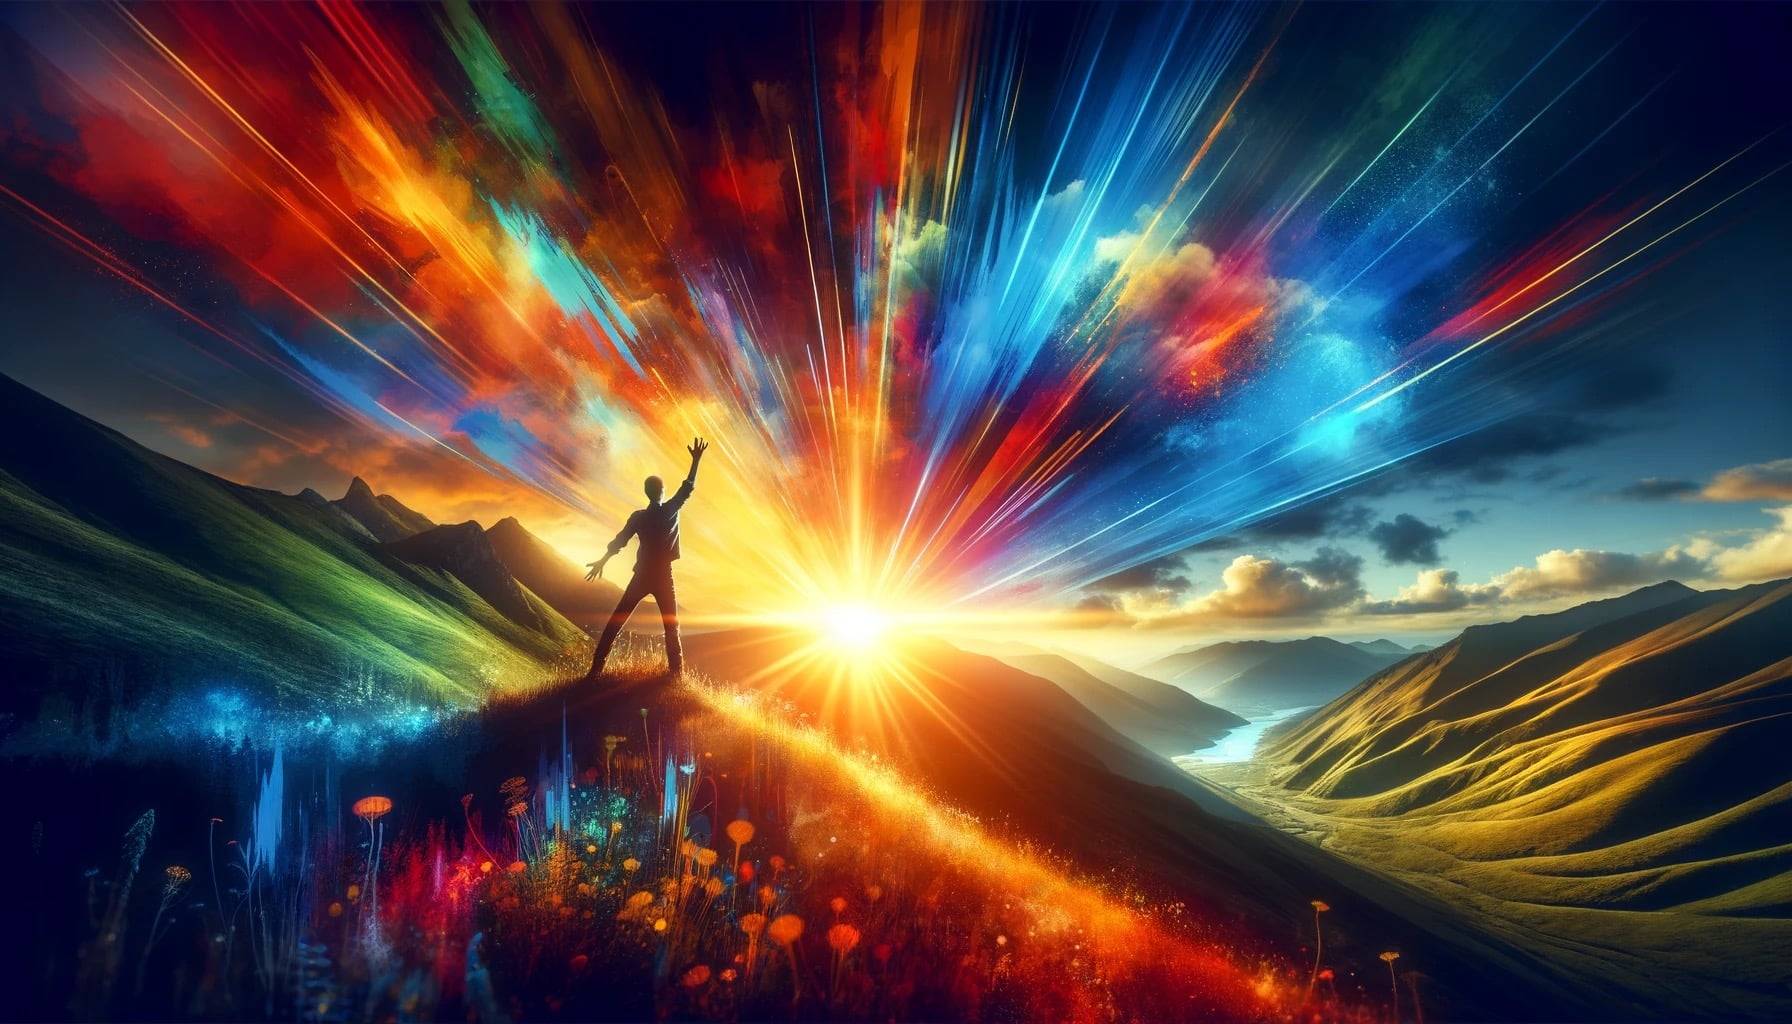 DALL·E-2023-11-16-16.26.41-A-dynamic-and-colorful-image-showing-a-young-person-standing-on-a-hilltop-arms-raised-high-looking-towards-a-rising-sun.-The-image-symbolizes-hope-